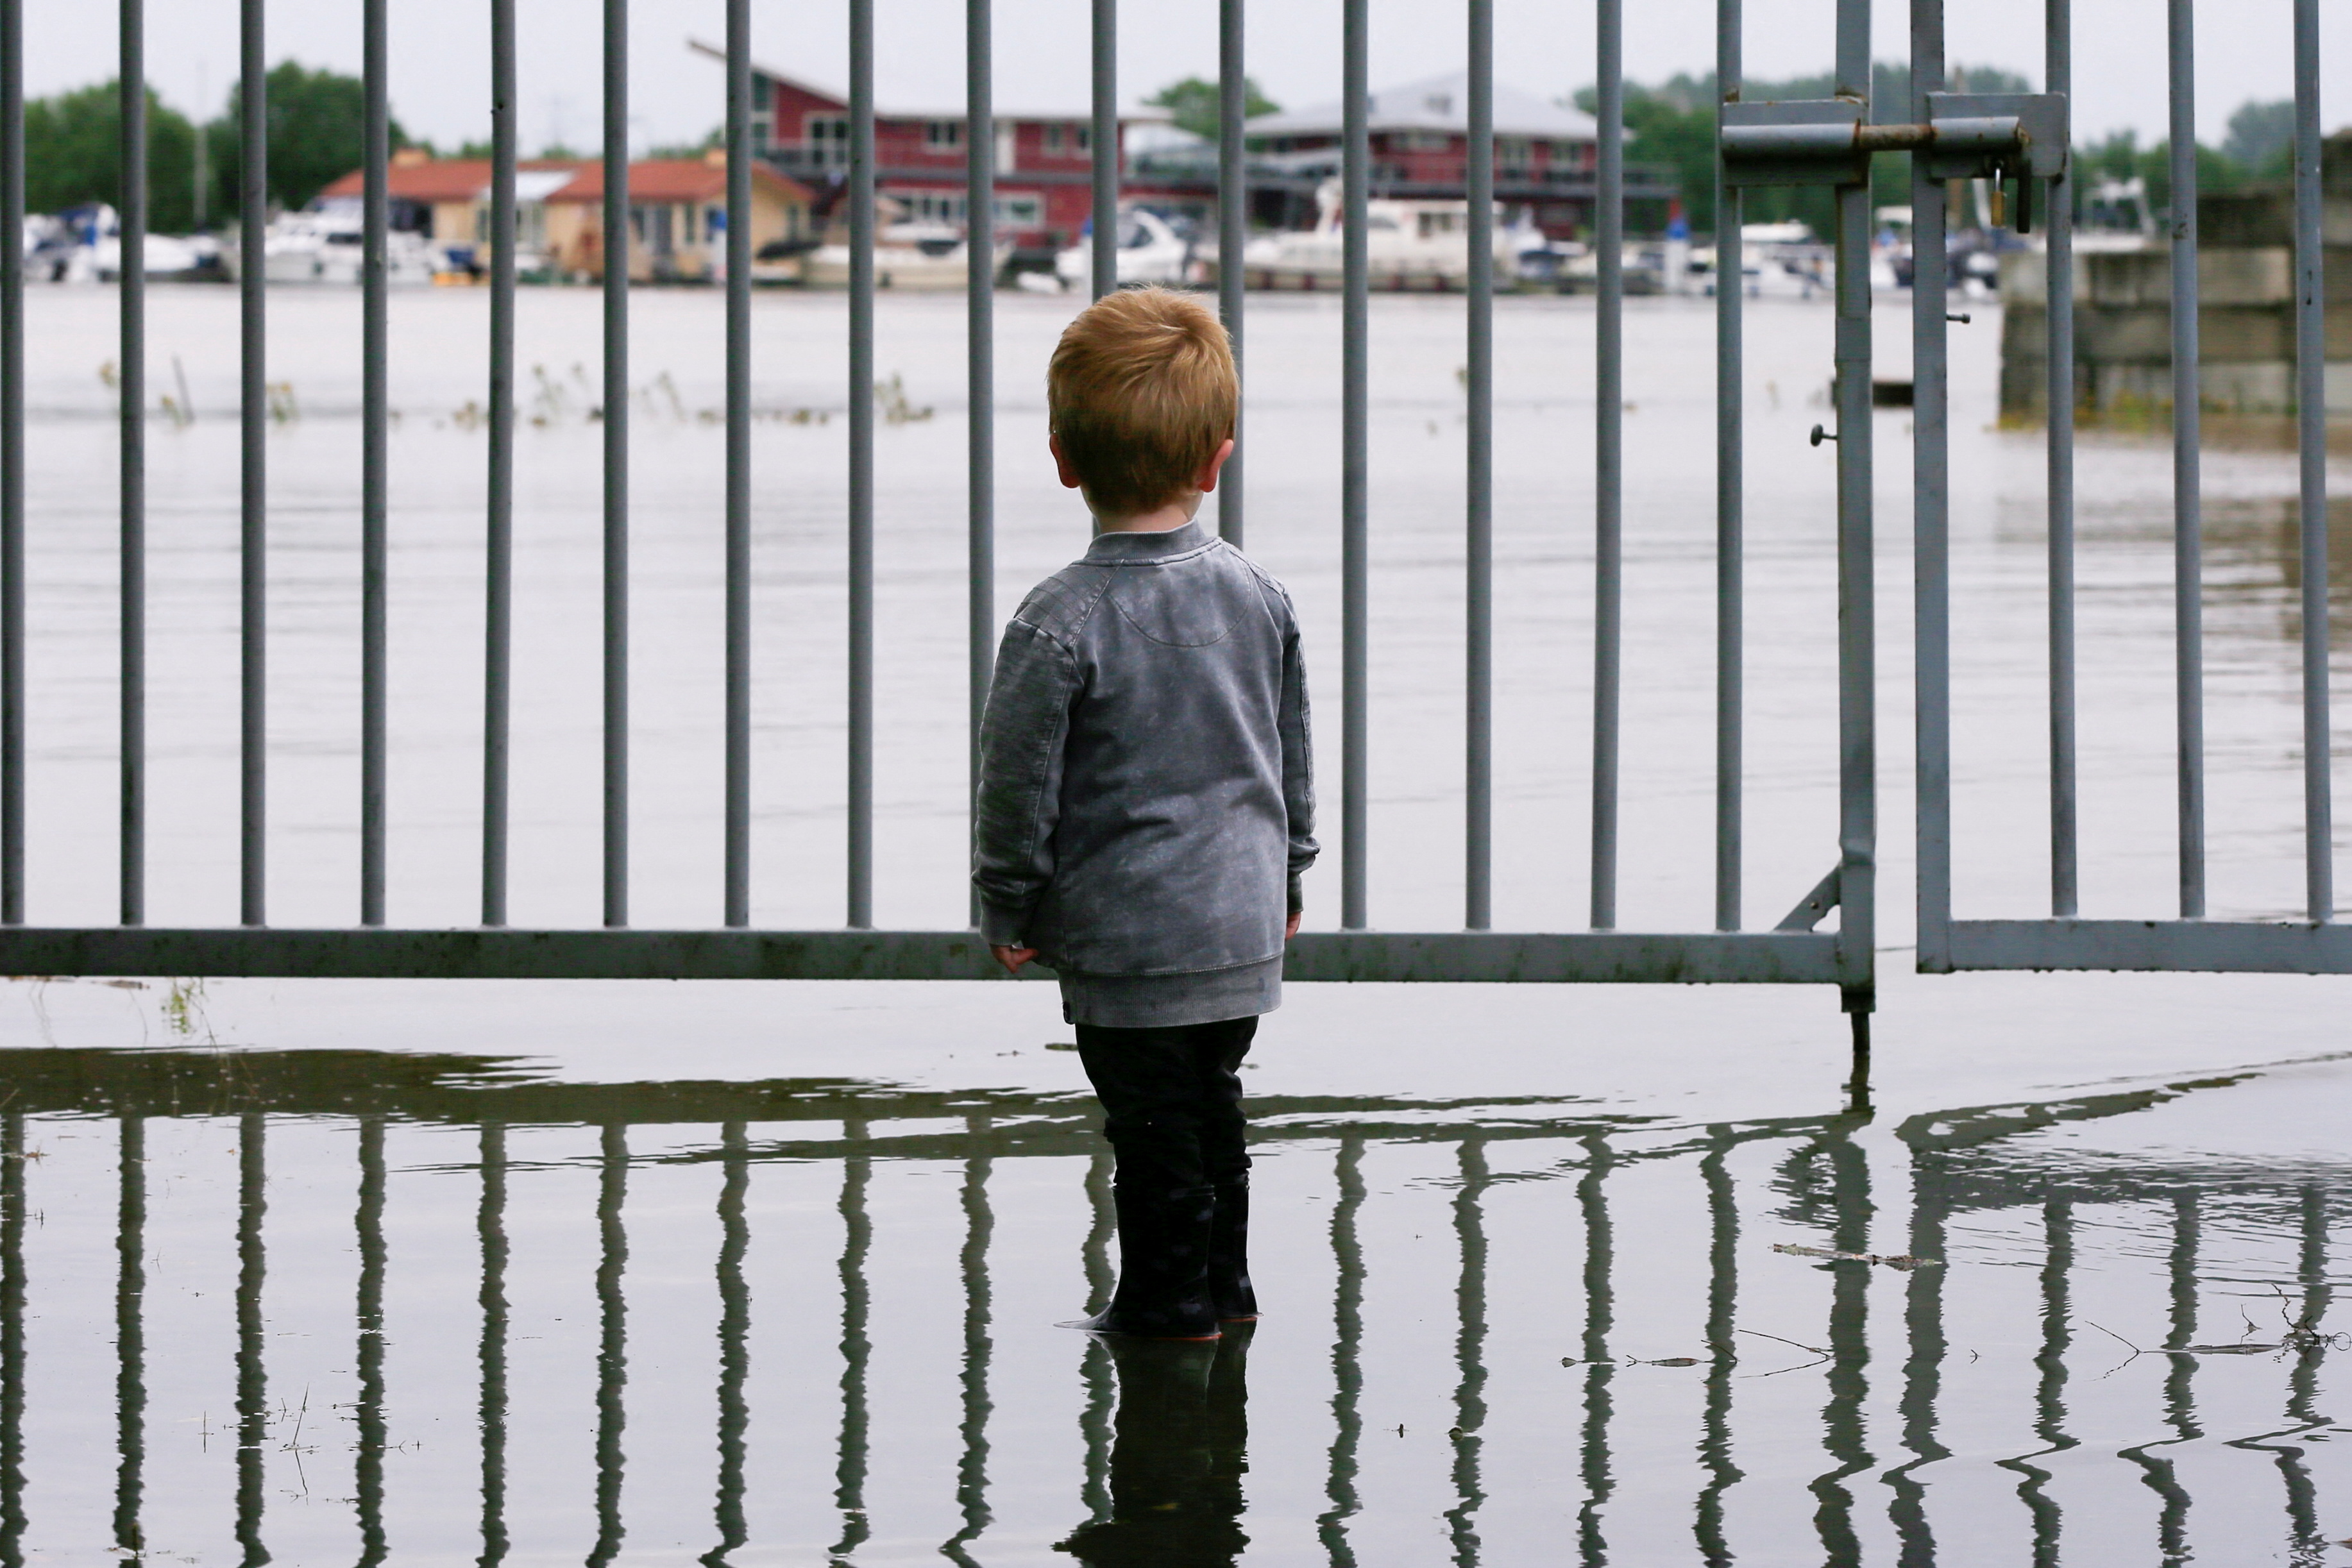 A child looks on as water floods through a fence, in Wessem